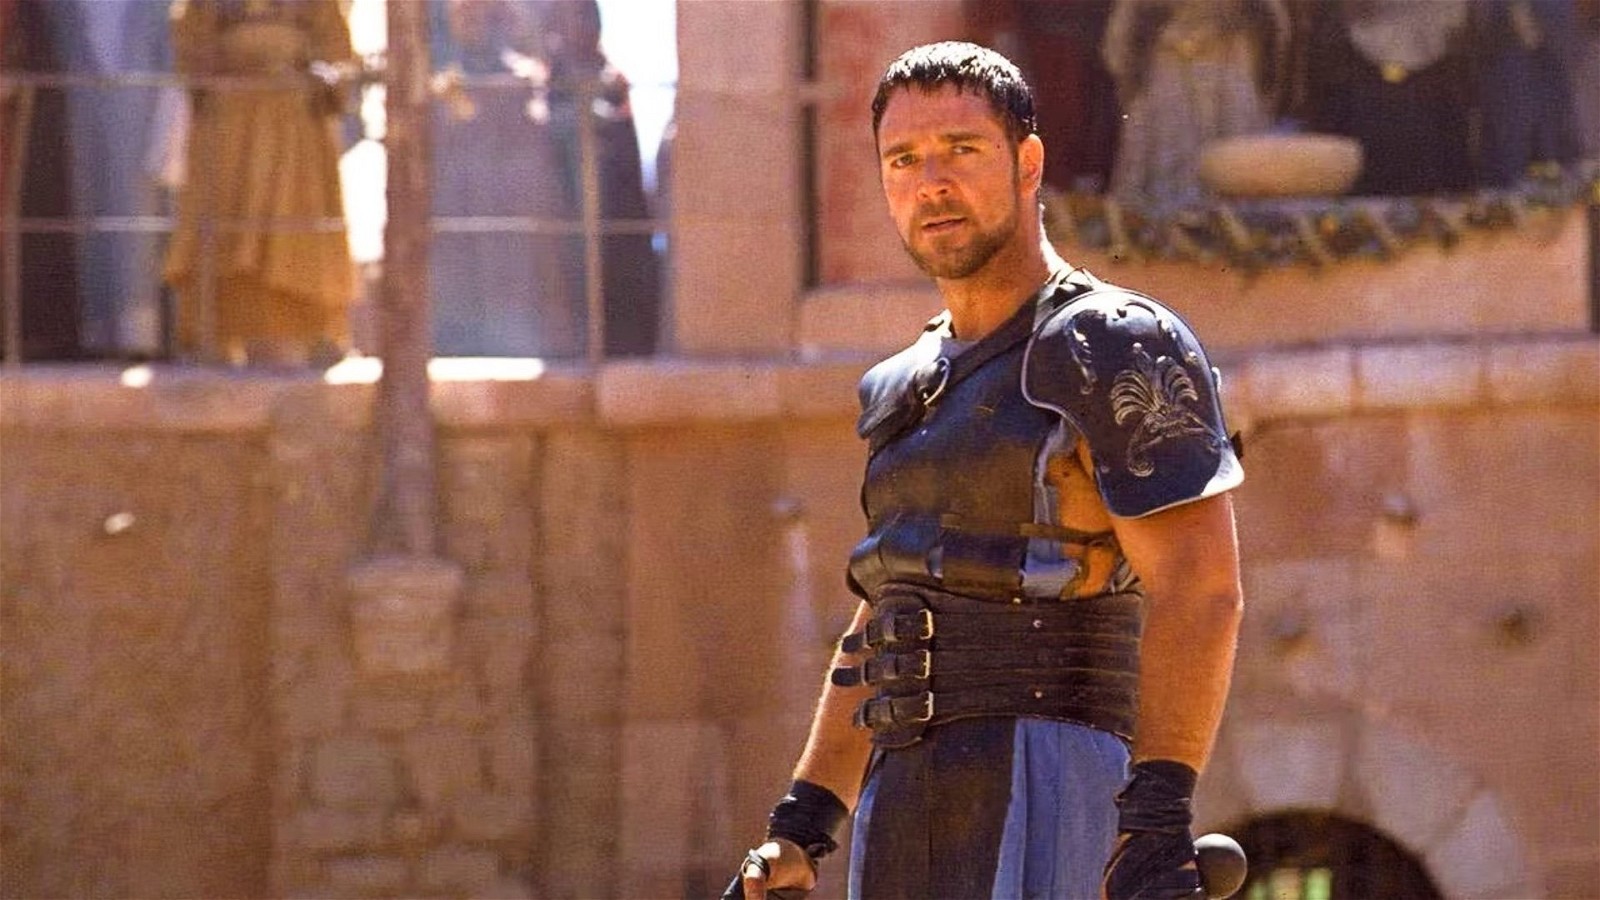 Gladiator 2 will be set approximately fifteen years after the first film